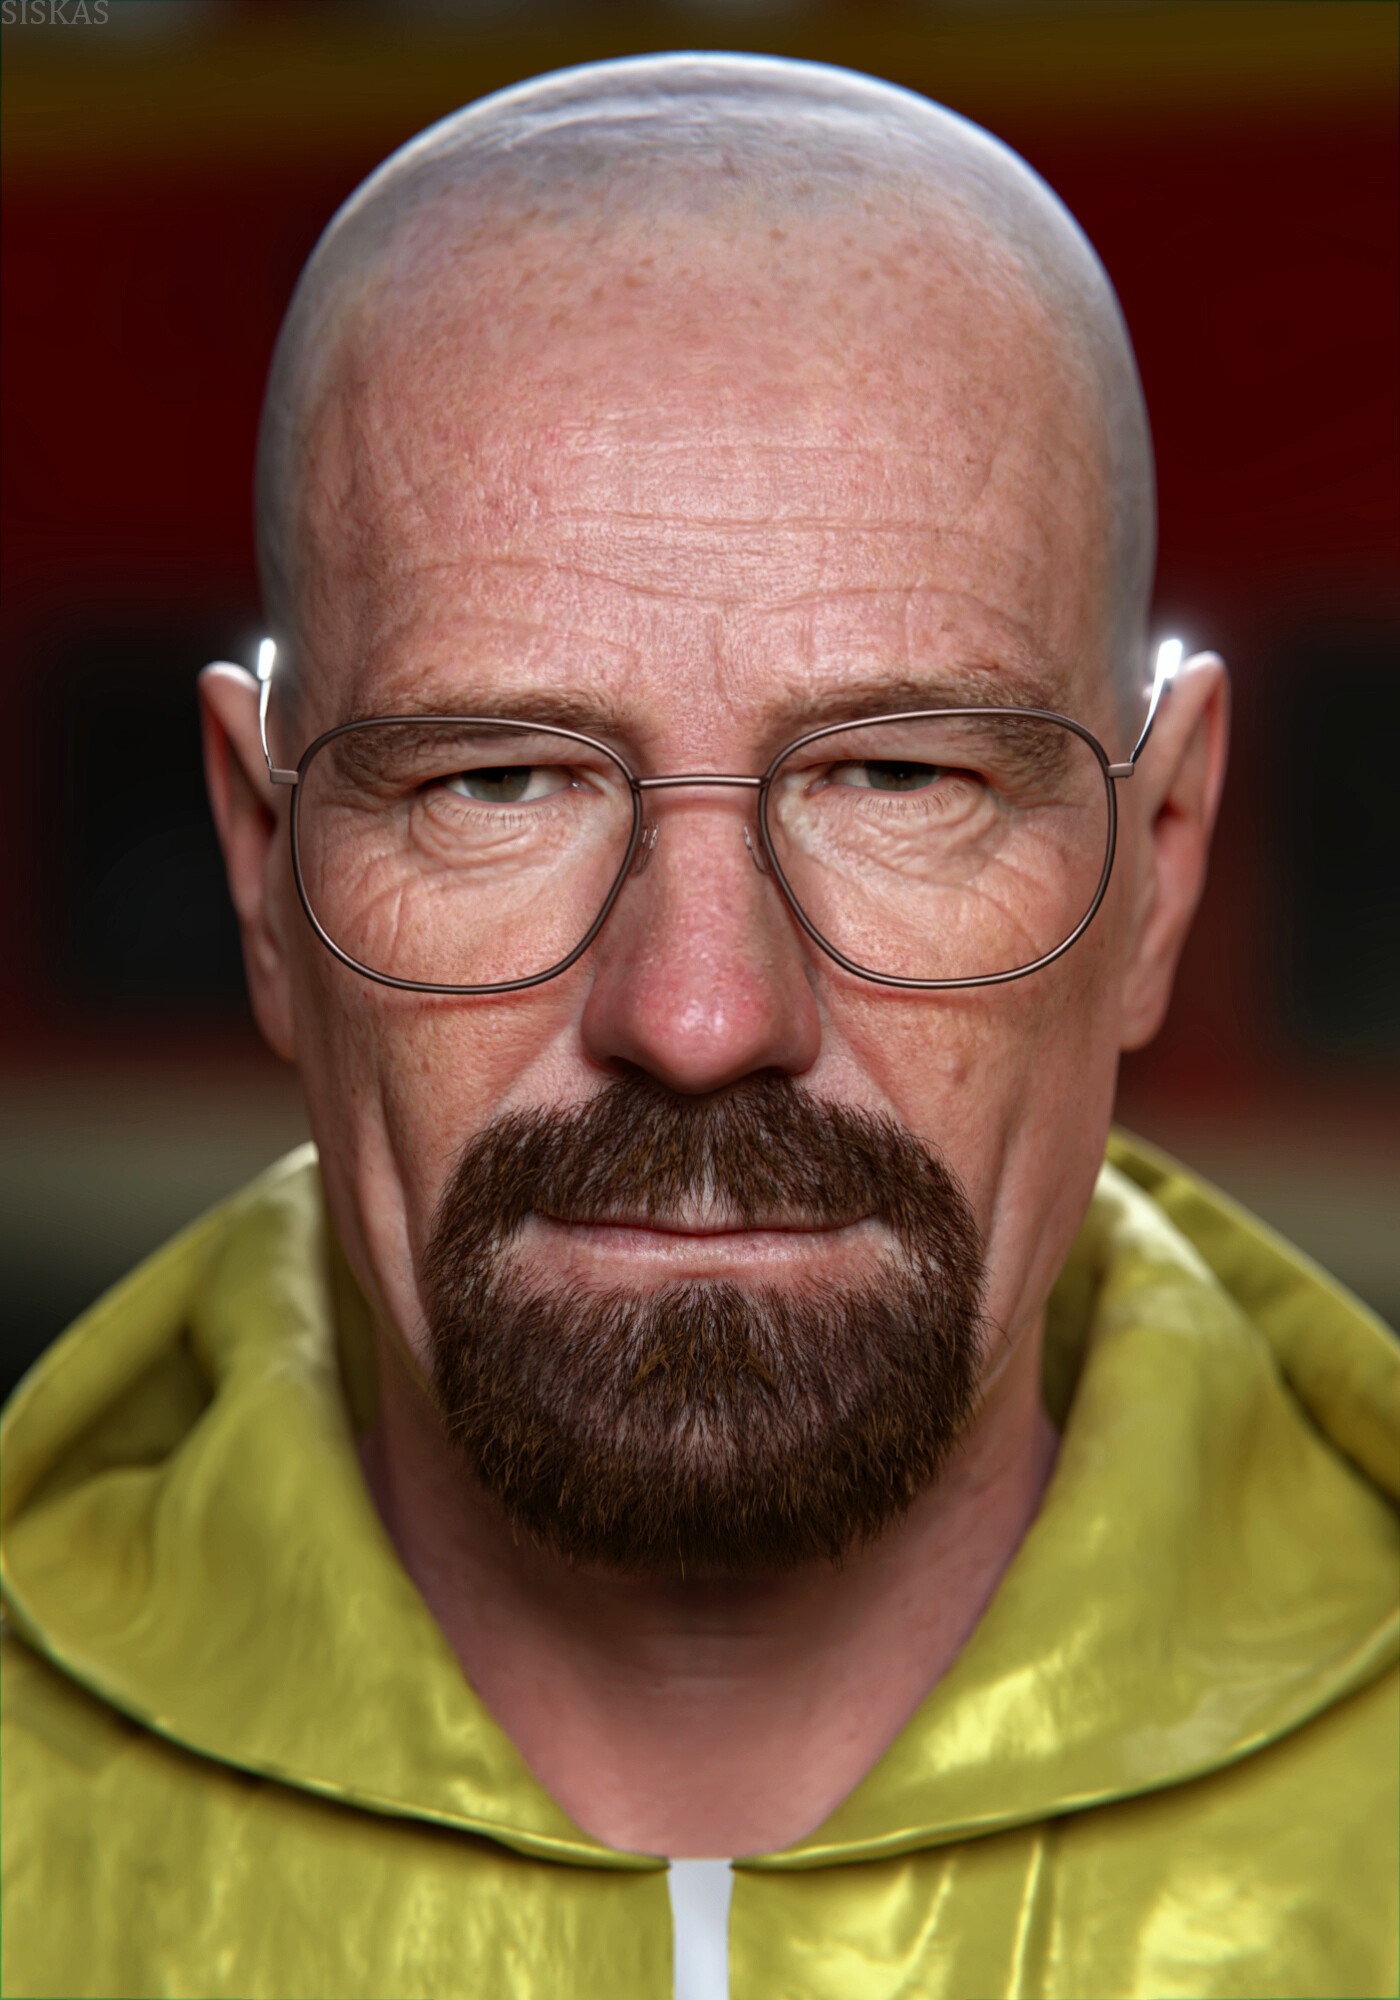 Walter White - Finished Projects - Blender Artists Community